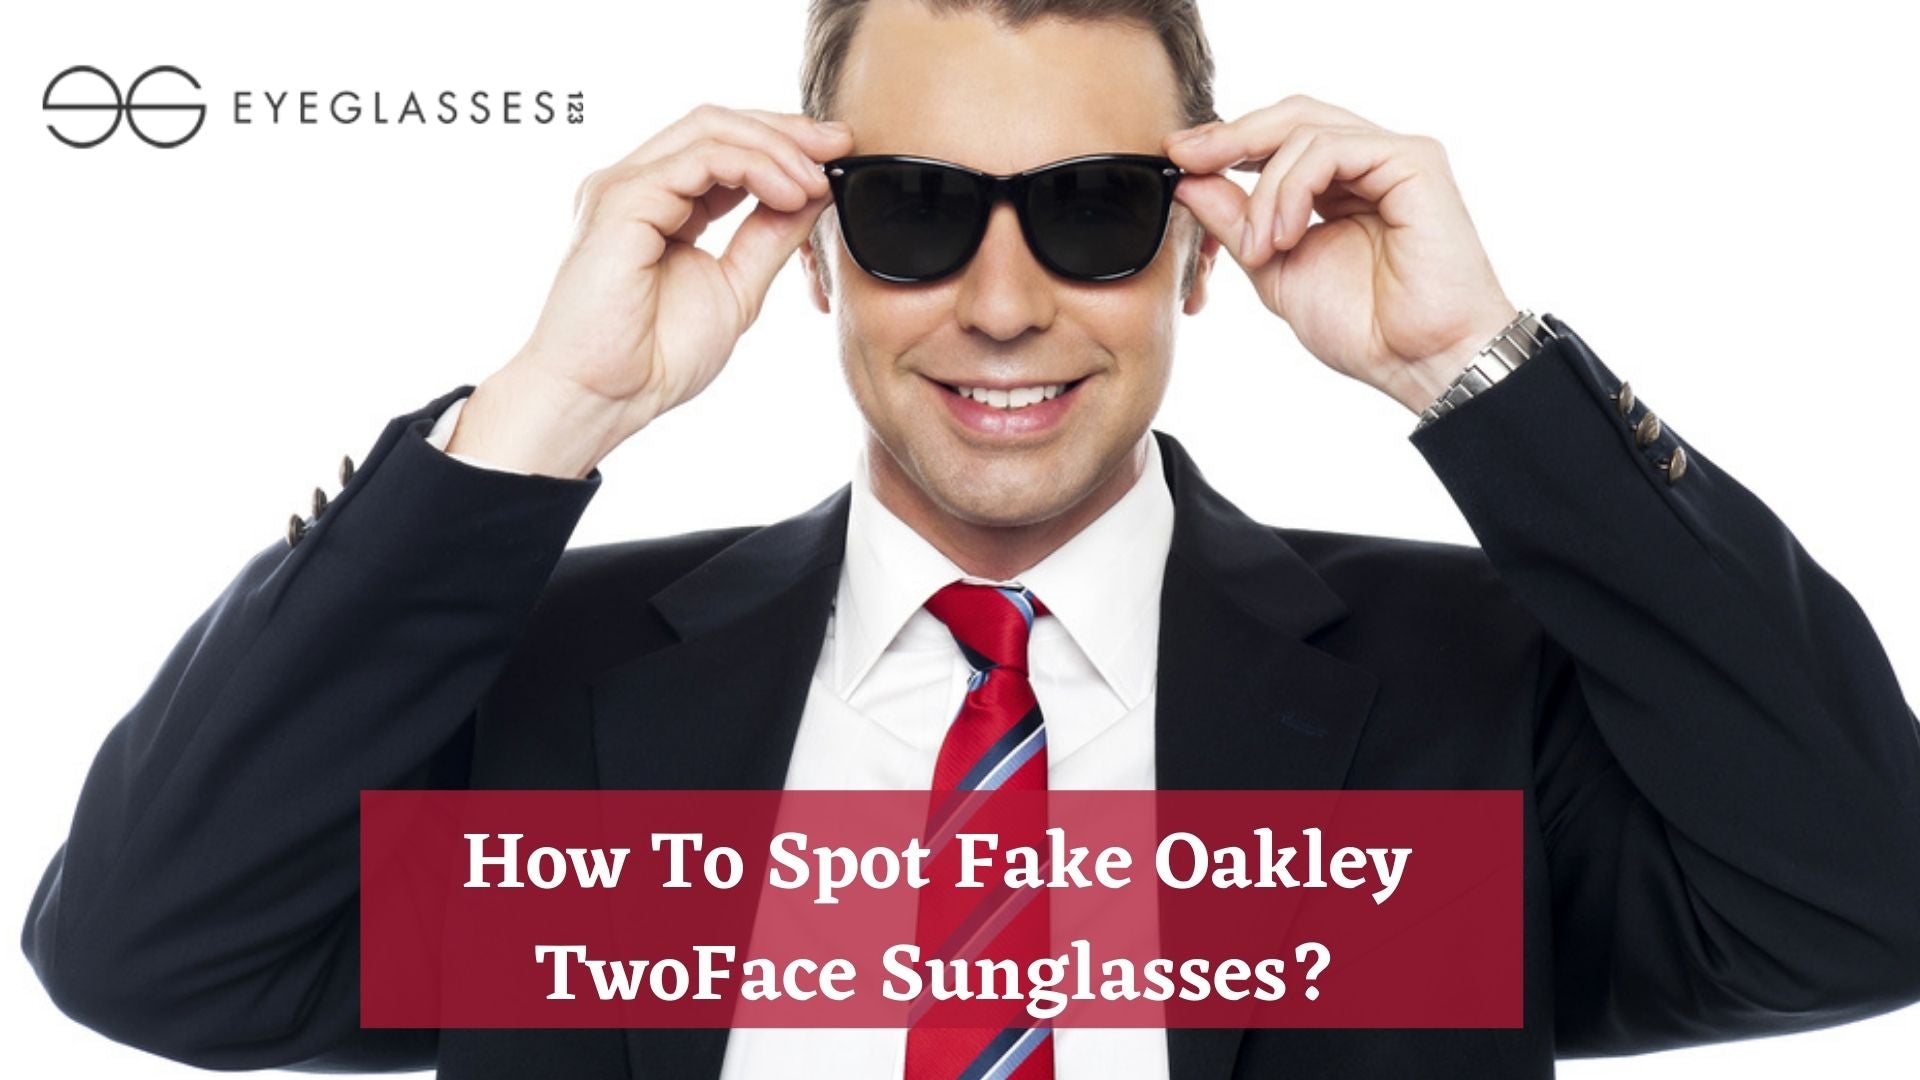 How To Spot Fake Oakley TwoFace Sunglasses